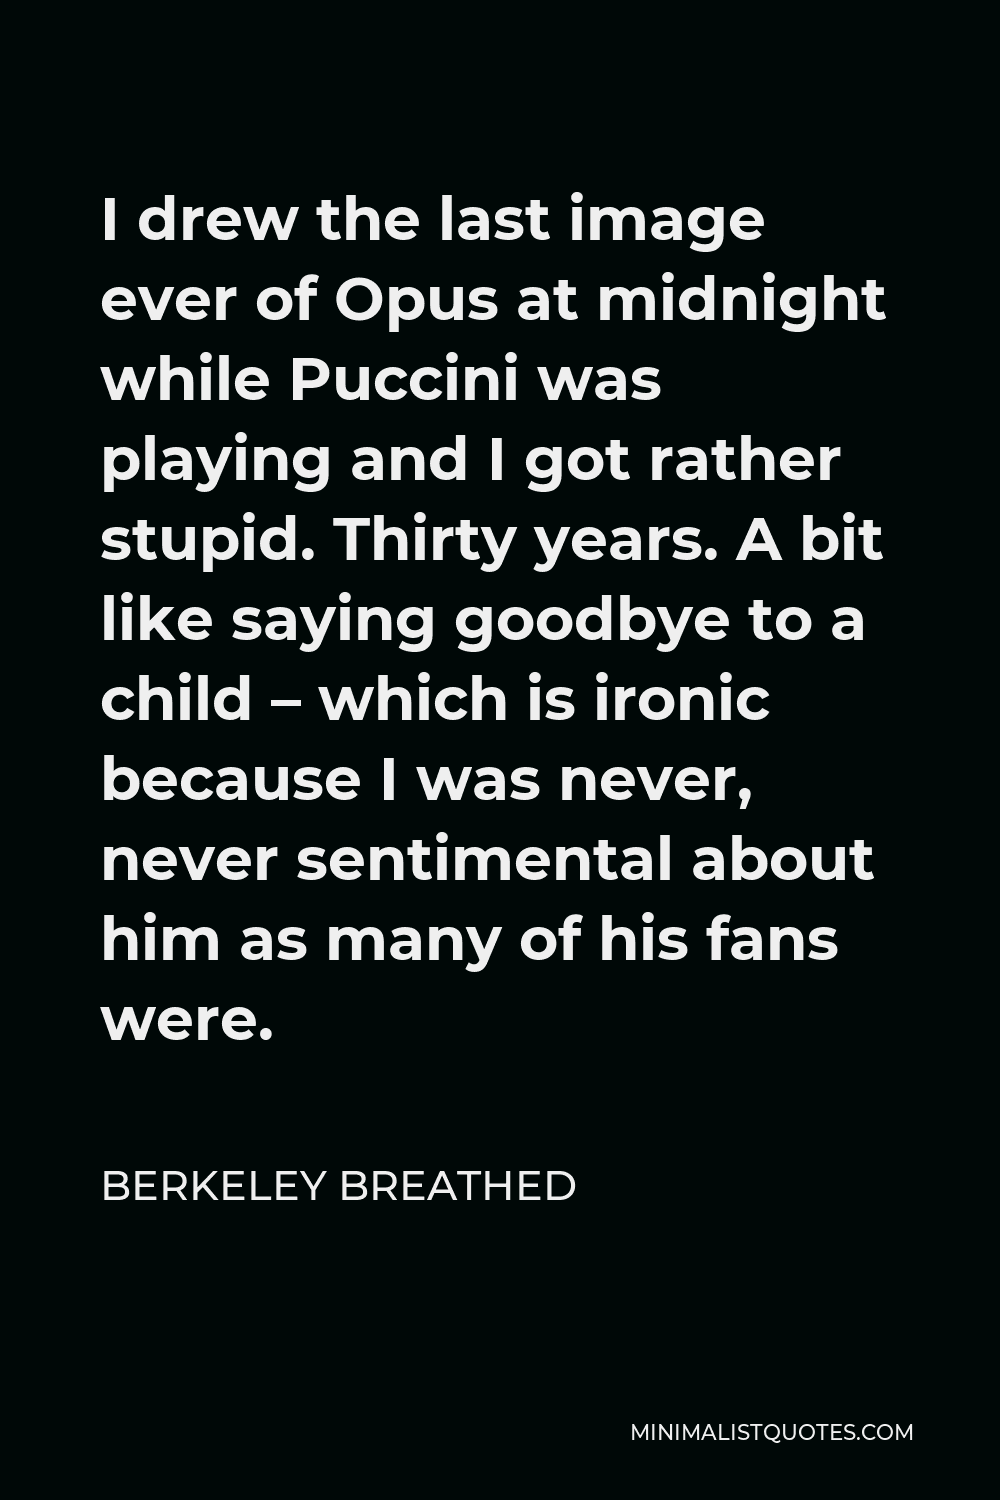 Berkeley Breathed Quote - I drew the last image ever of Opus at midnight while Puccini was playing and I got rather stupid. Thirty years. A bit like saying goodbye to a child – which is ironic because I was never, never sentimental about him as many of his fans were.